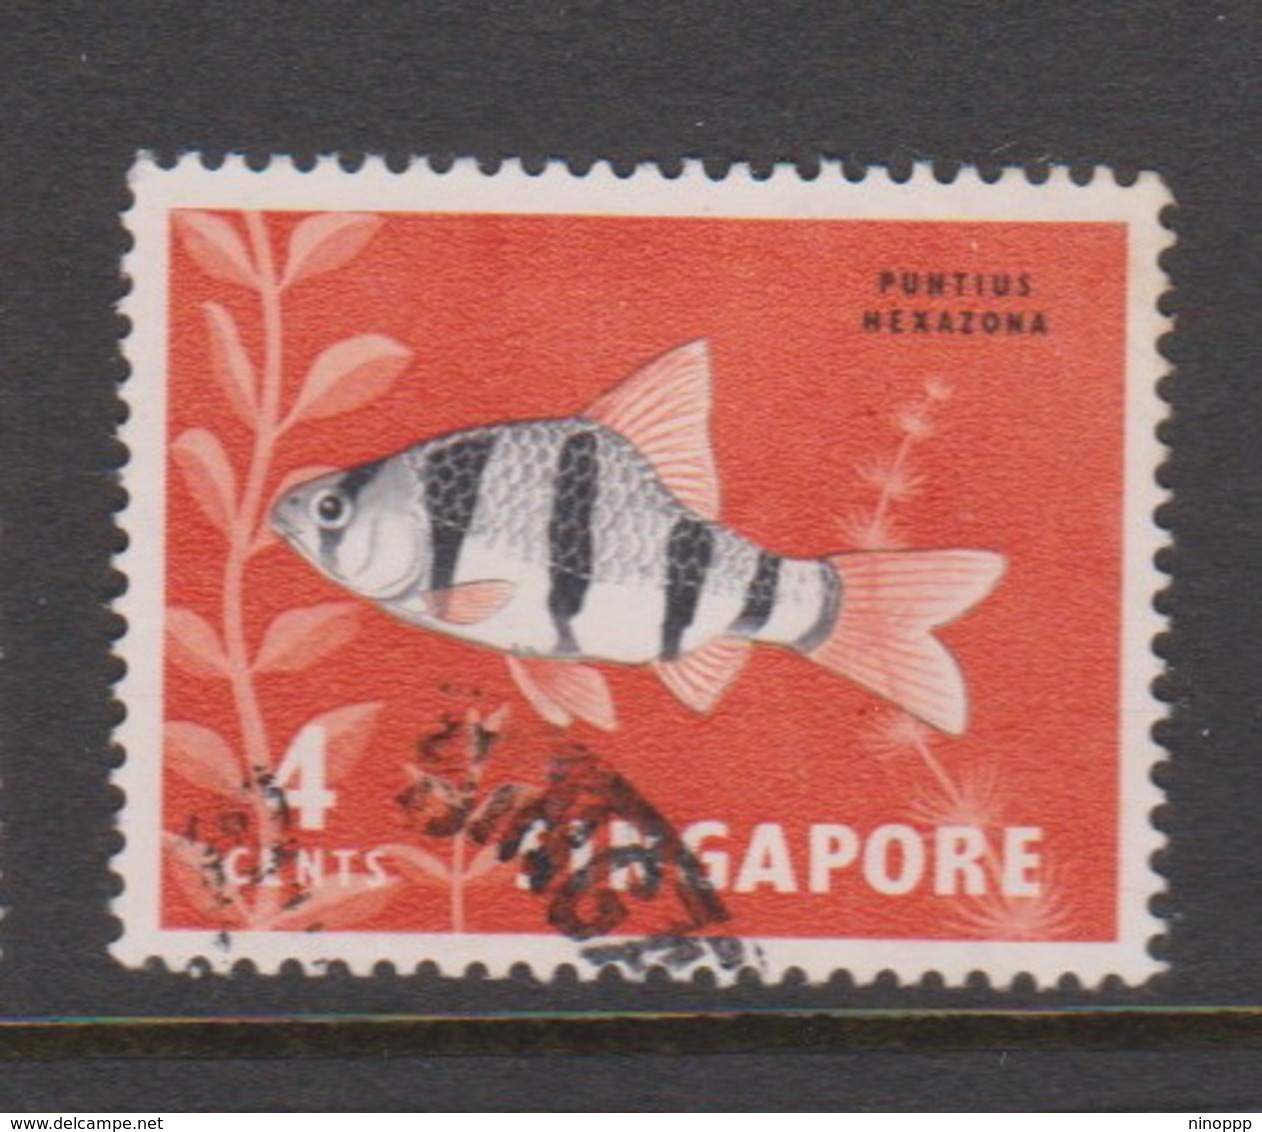 Singapore 68 1962-66 Fishes Orchids And Birds Definitives,4c Tiger Barb Used - Singapore (1959-...)